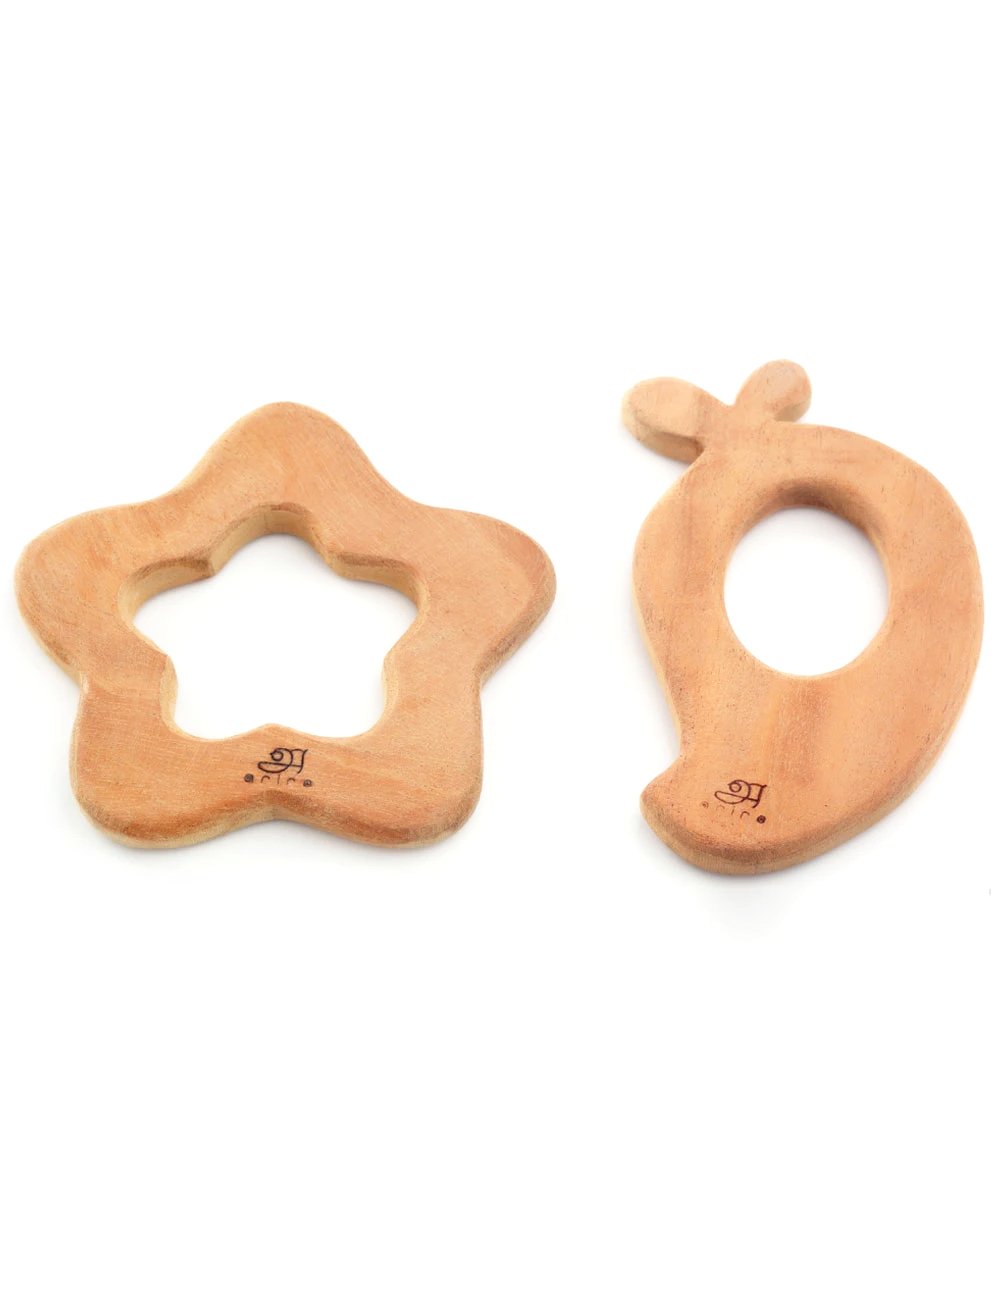 Neem Wooden Teethers - Mango and Star